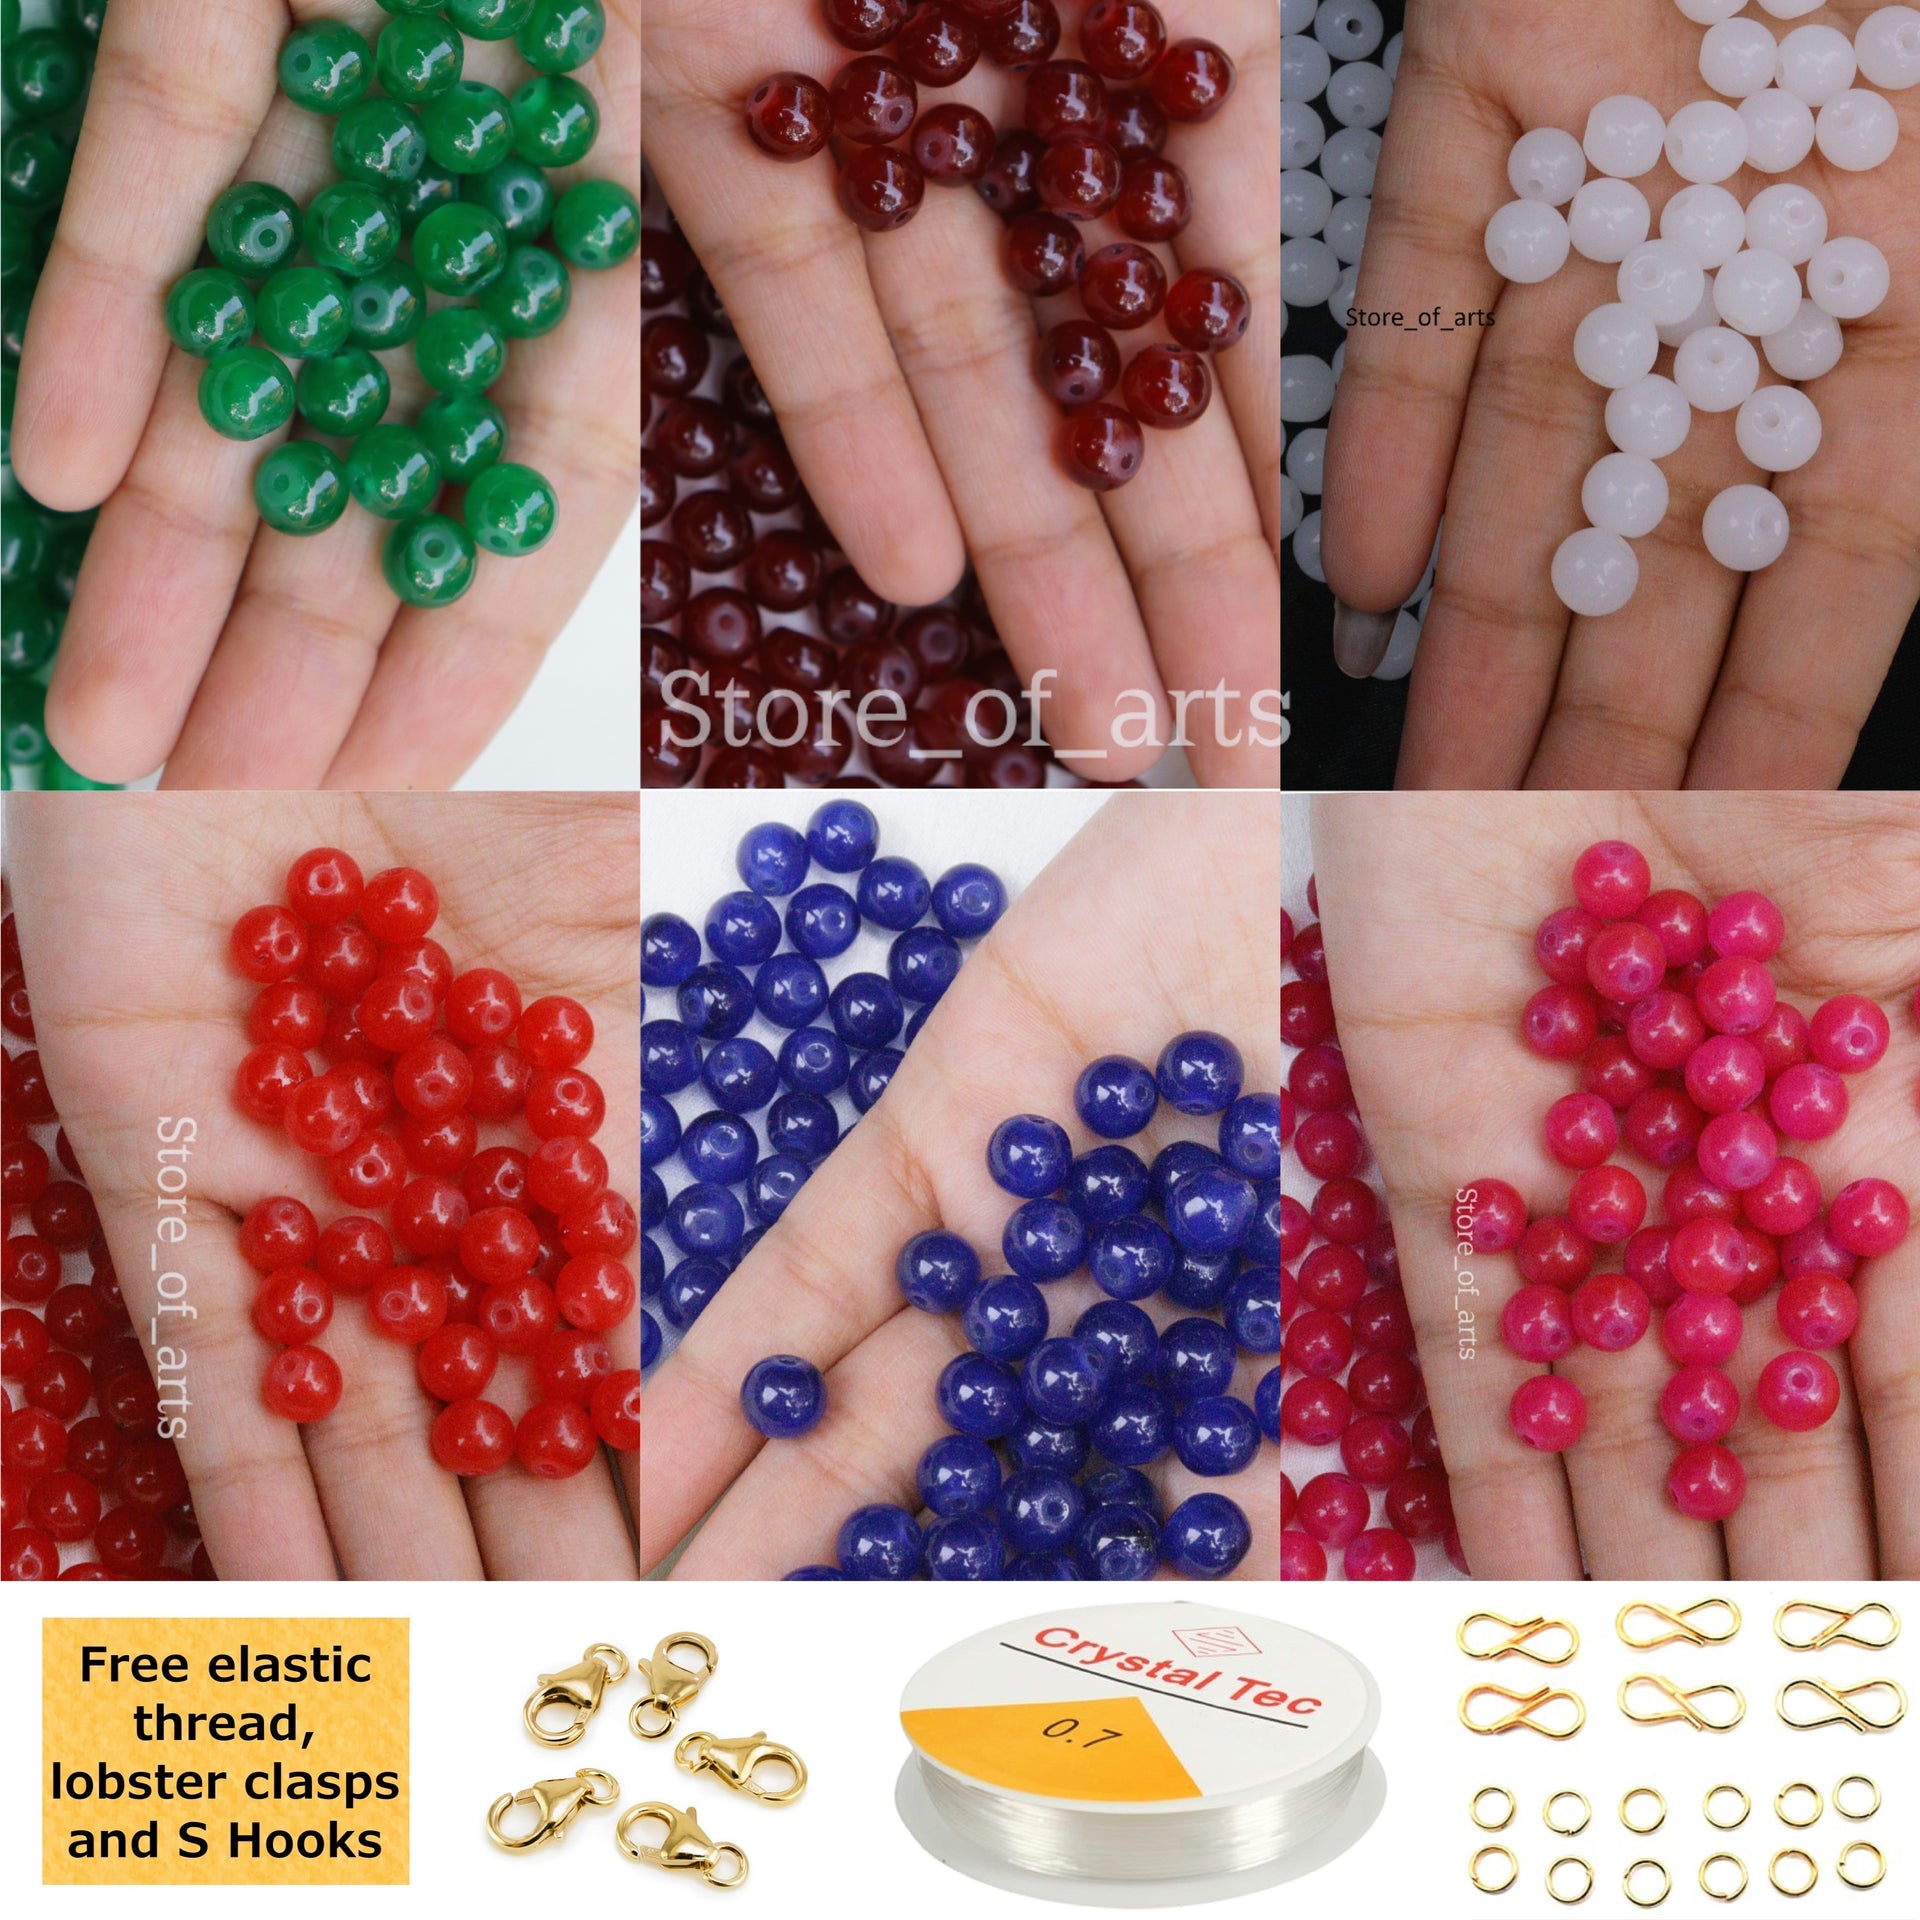 384pcs/624pcs 8mm Glass Beads For Jewelry Making, 24 Random Colors 8mm  Crystal Beads Imitation Jade Beads Bracelet Making Kit With Jump Ring,  Lobster Clasp, Elastic Thread For Bracelet Necklace Earrings Jewelry Making